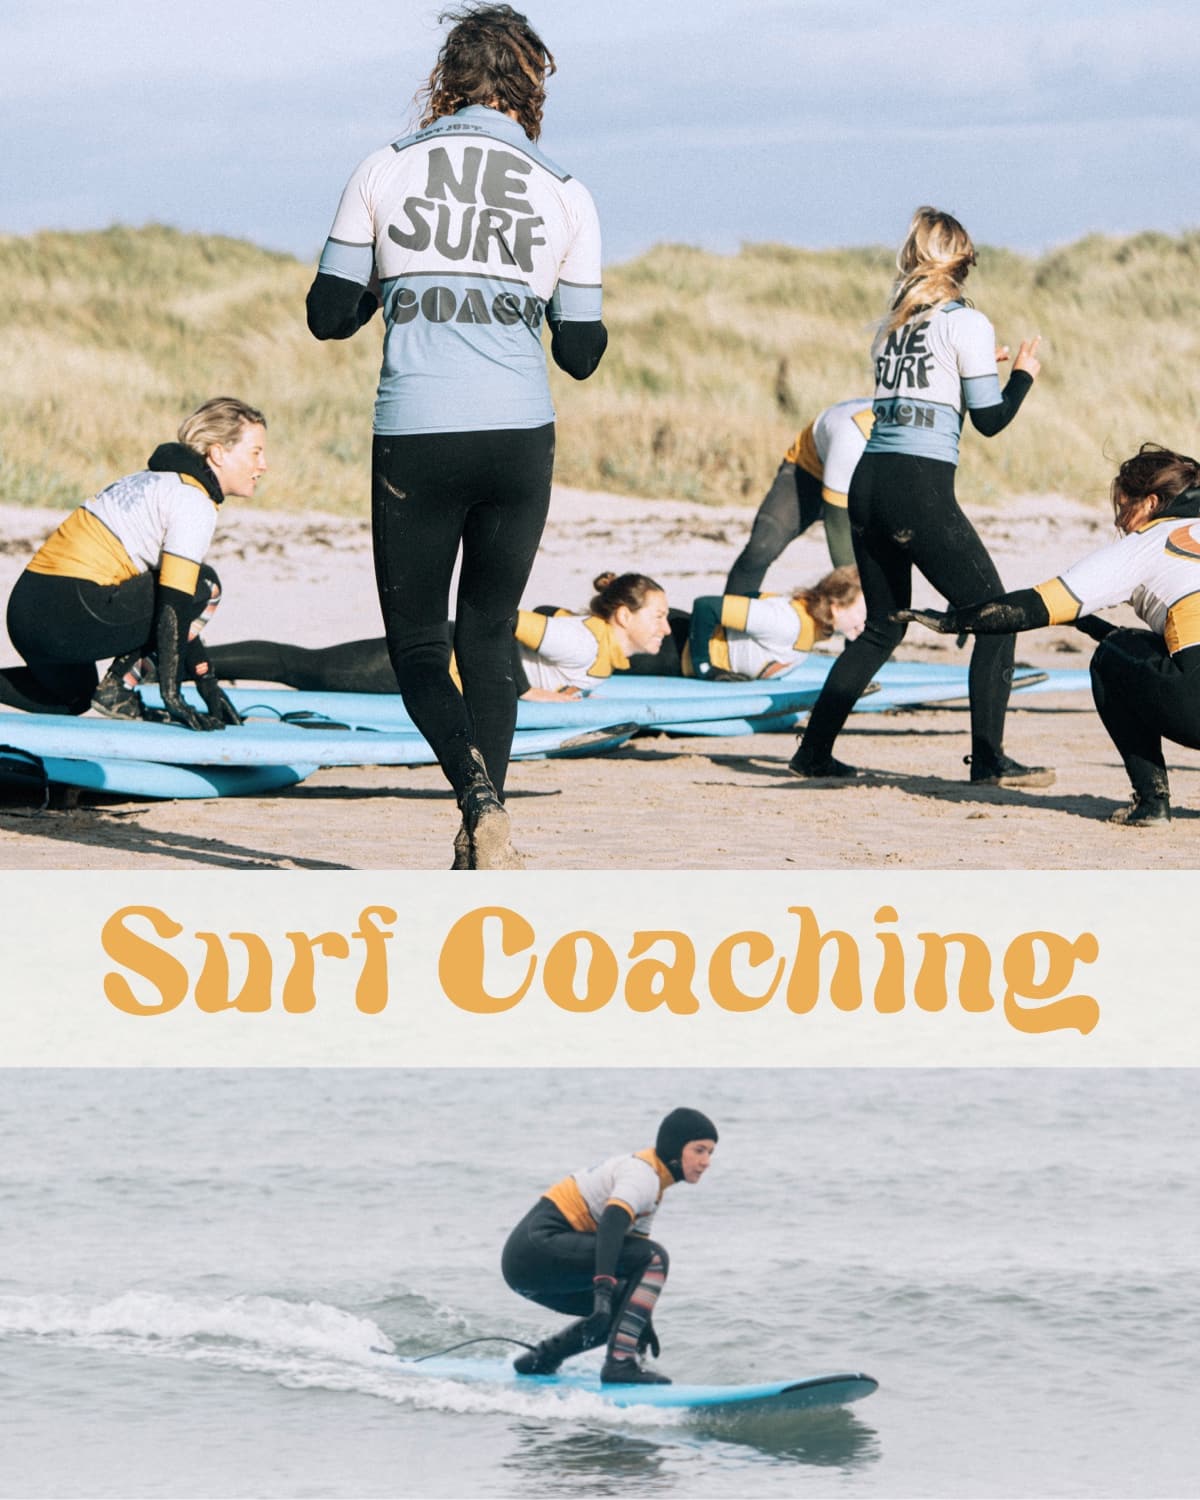 Surfers doing a coaching drill on the beach and a surfer on a small unbroken wave